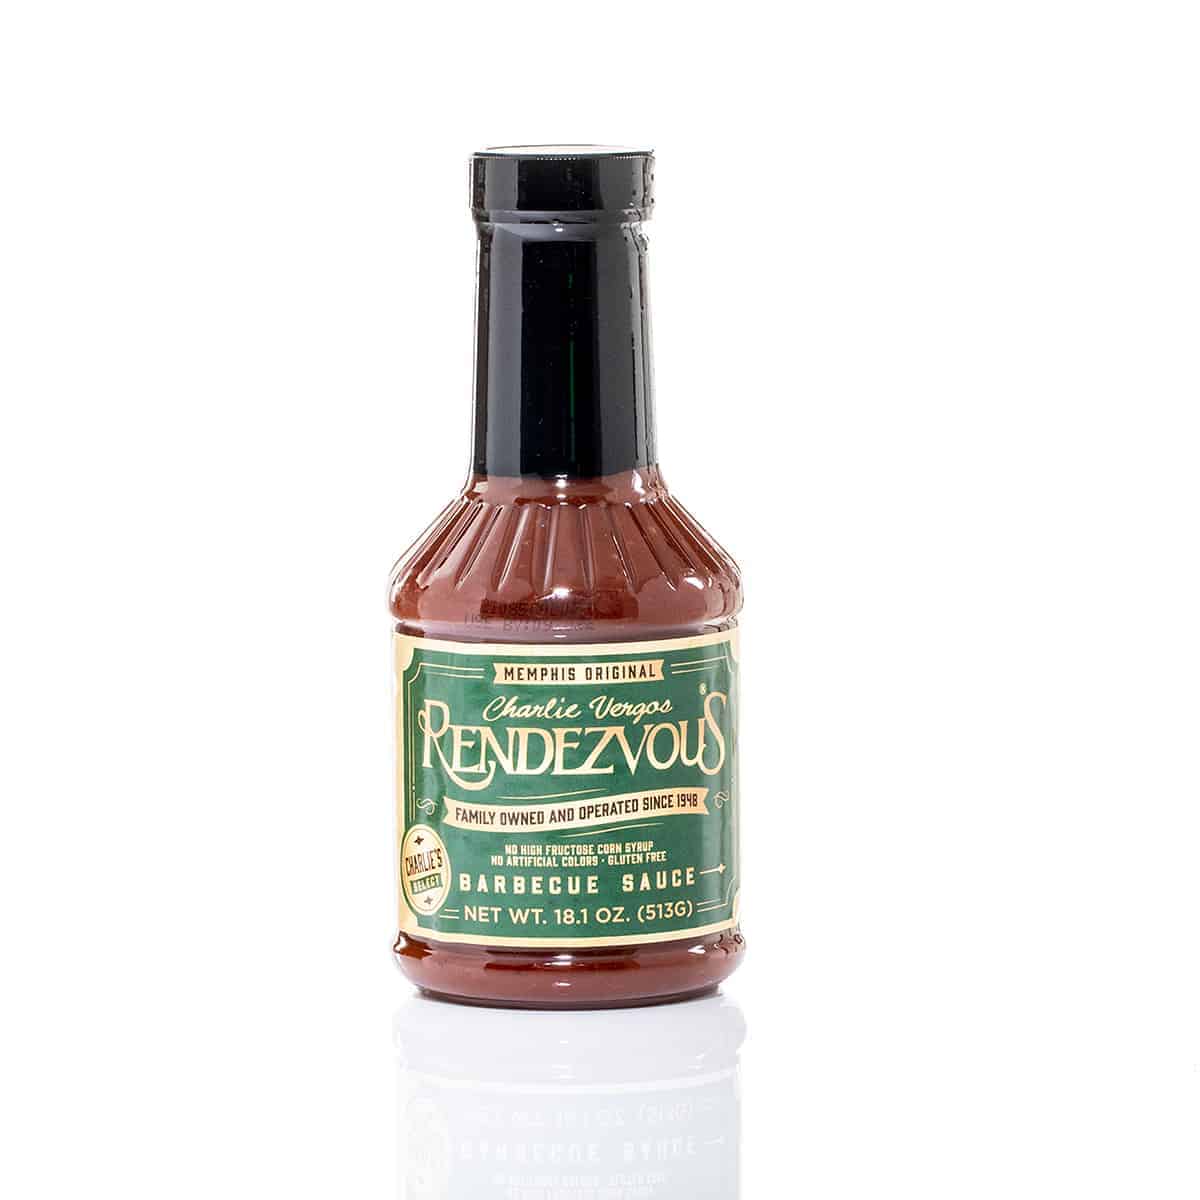 Rendezvous “Charlie’s Select” Sauce